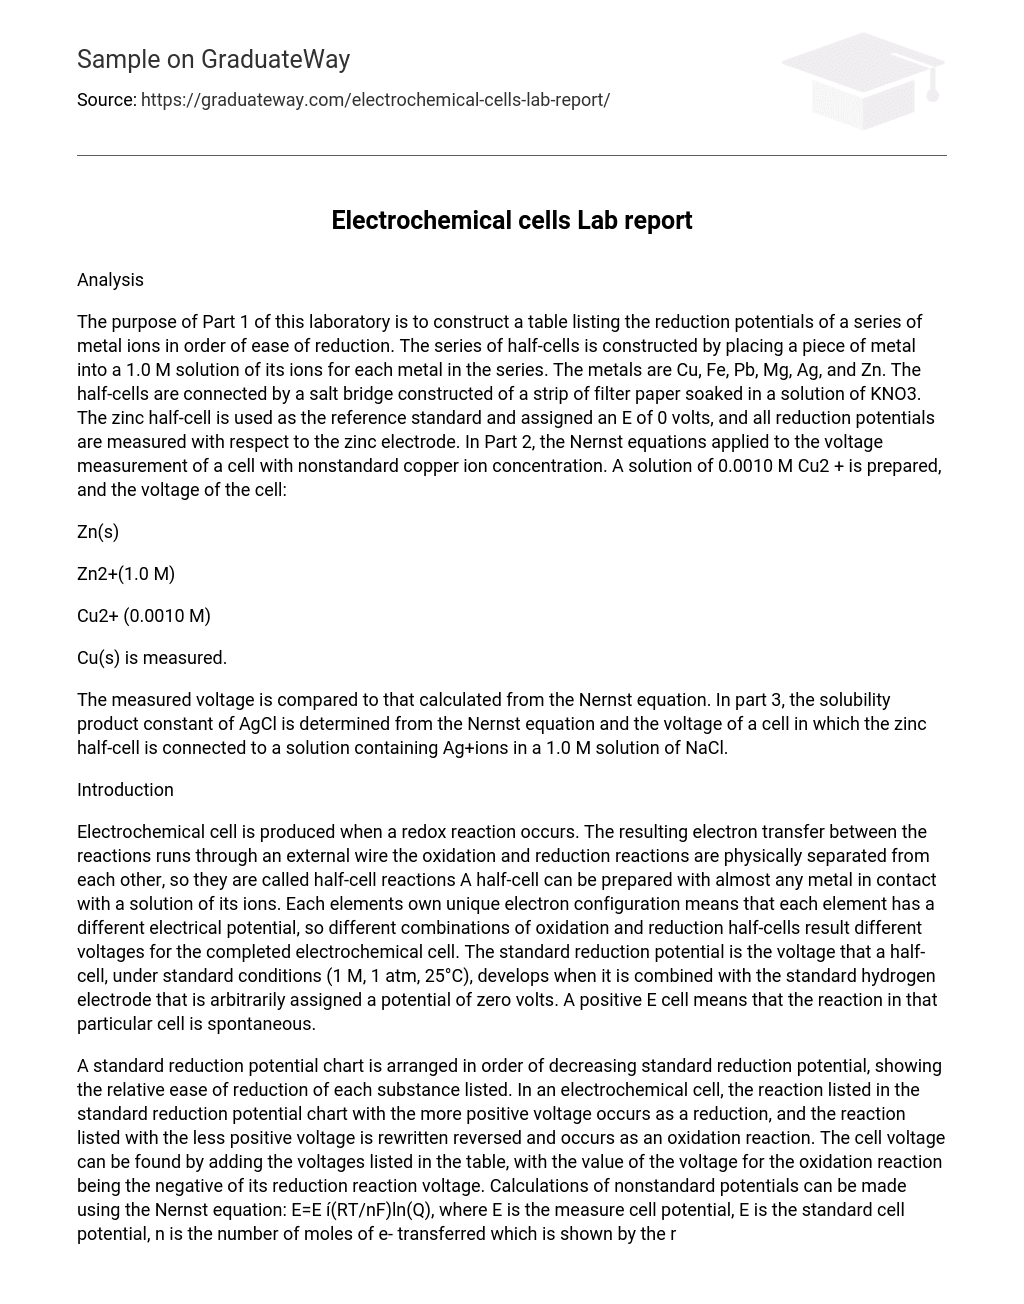 Electrochemical cells Lab report